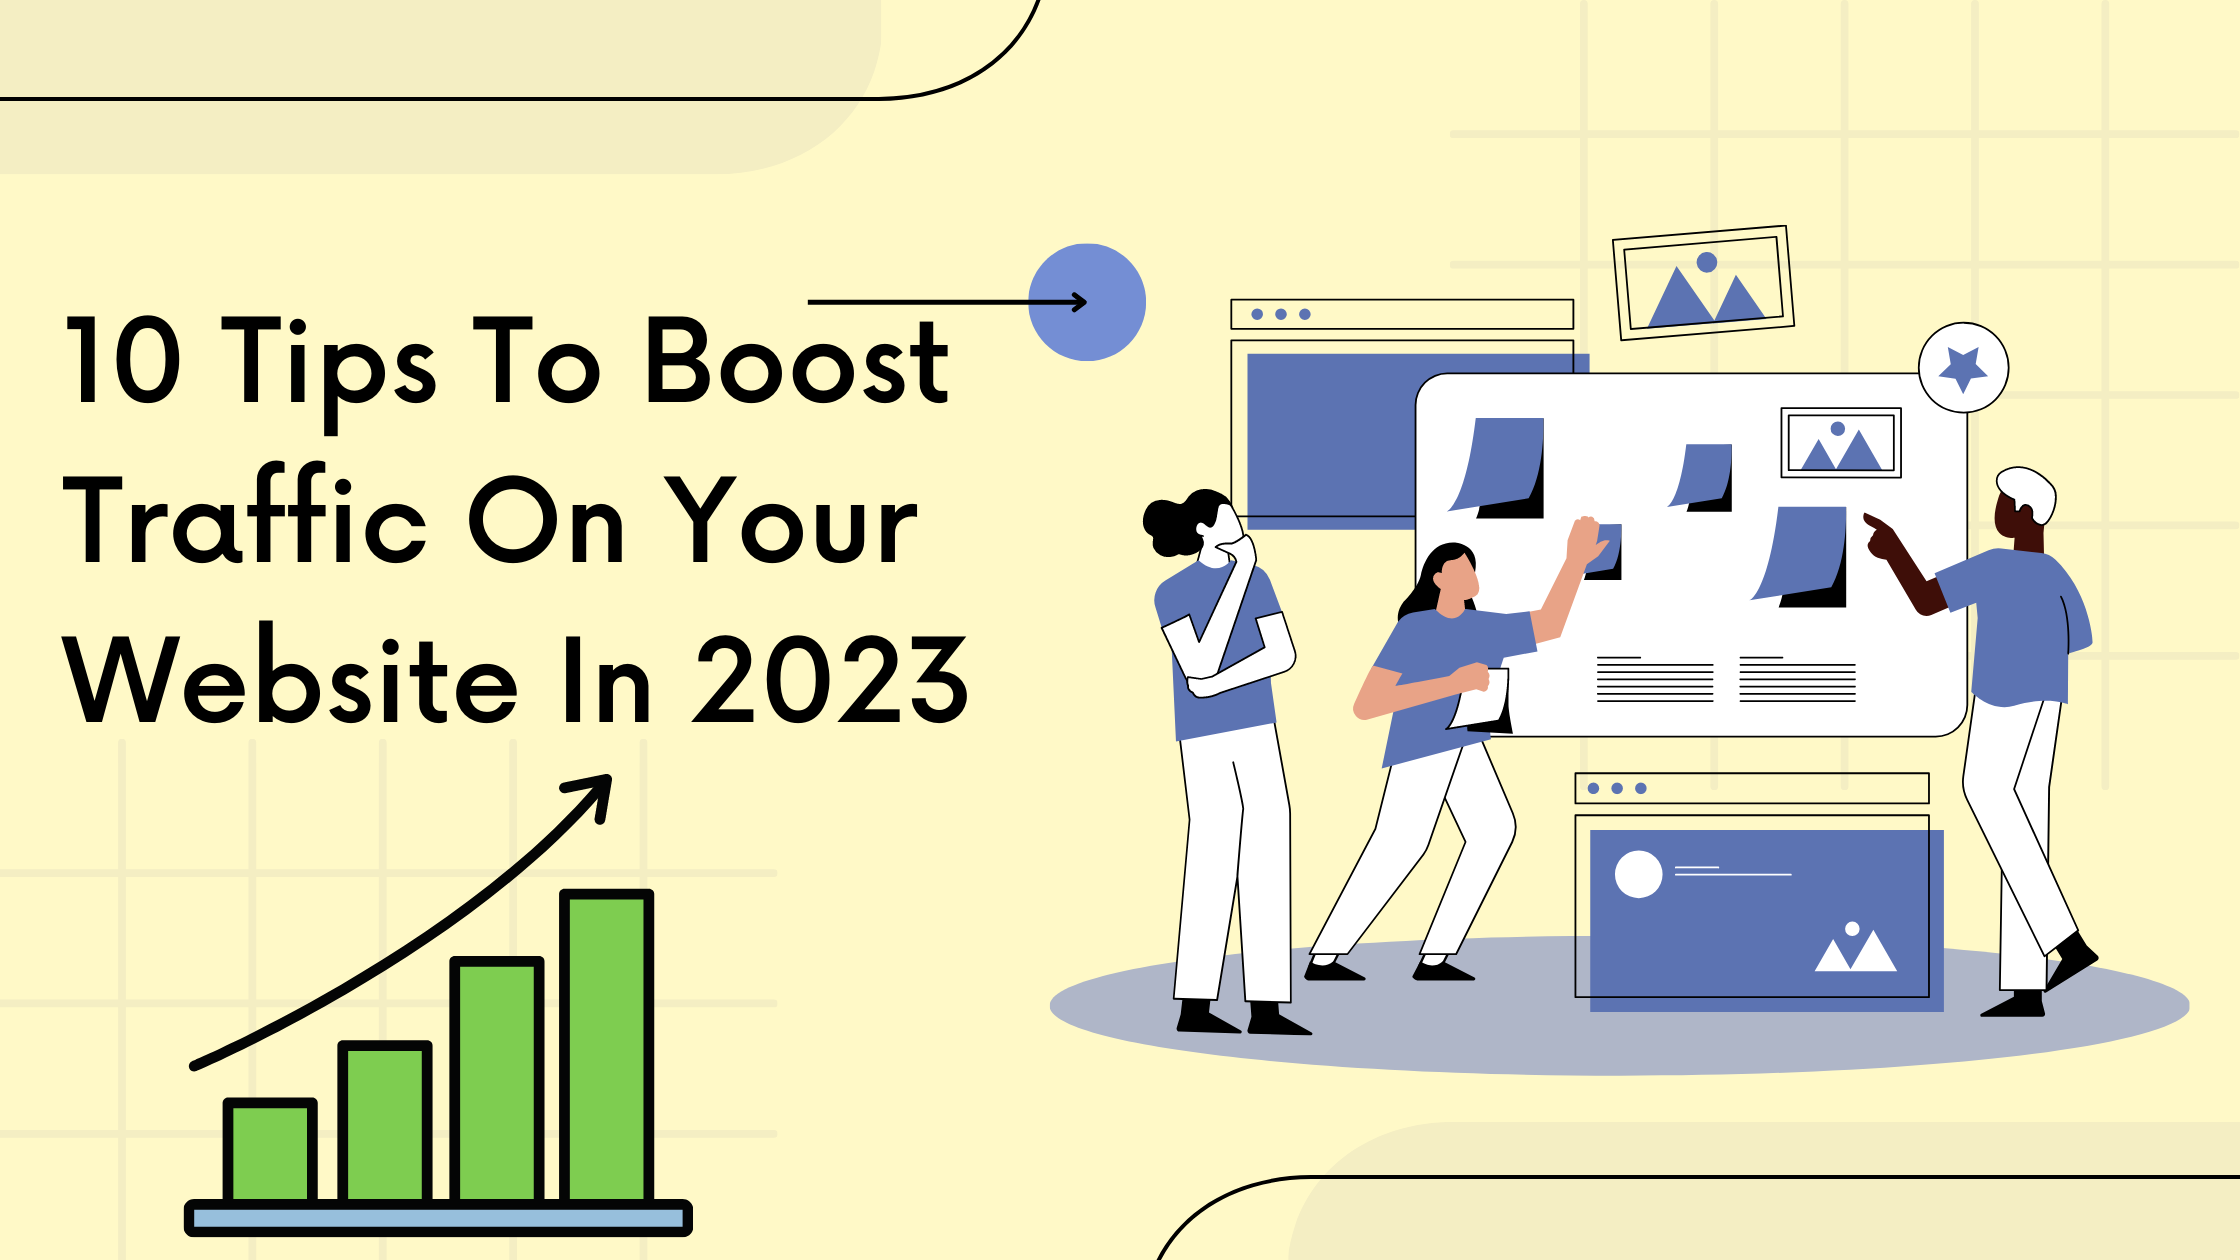 10 Tips To Boost Traffic On Your Website In 2023